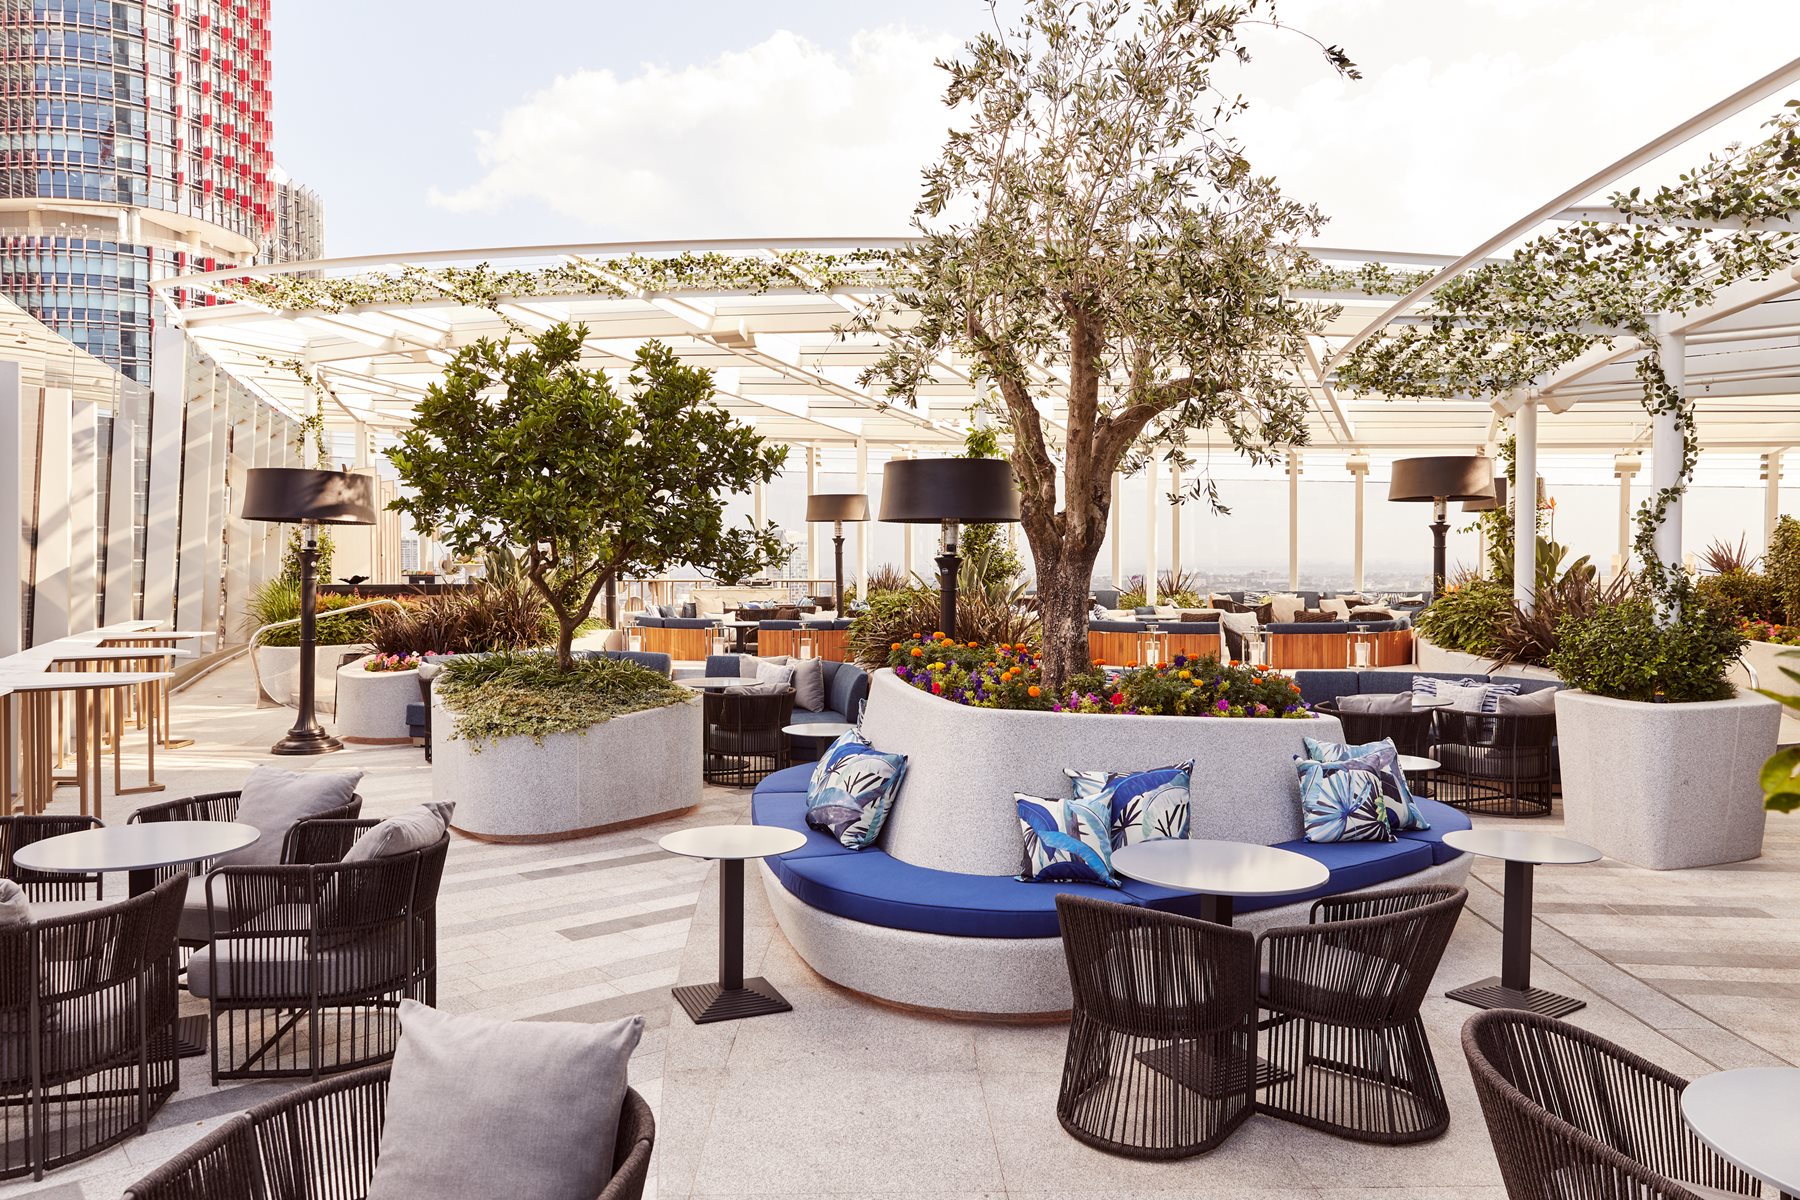 cirq terrace and rooftop bar
